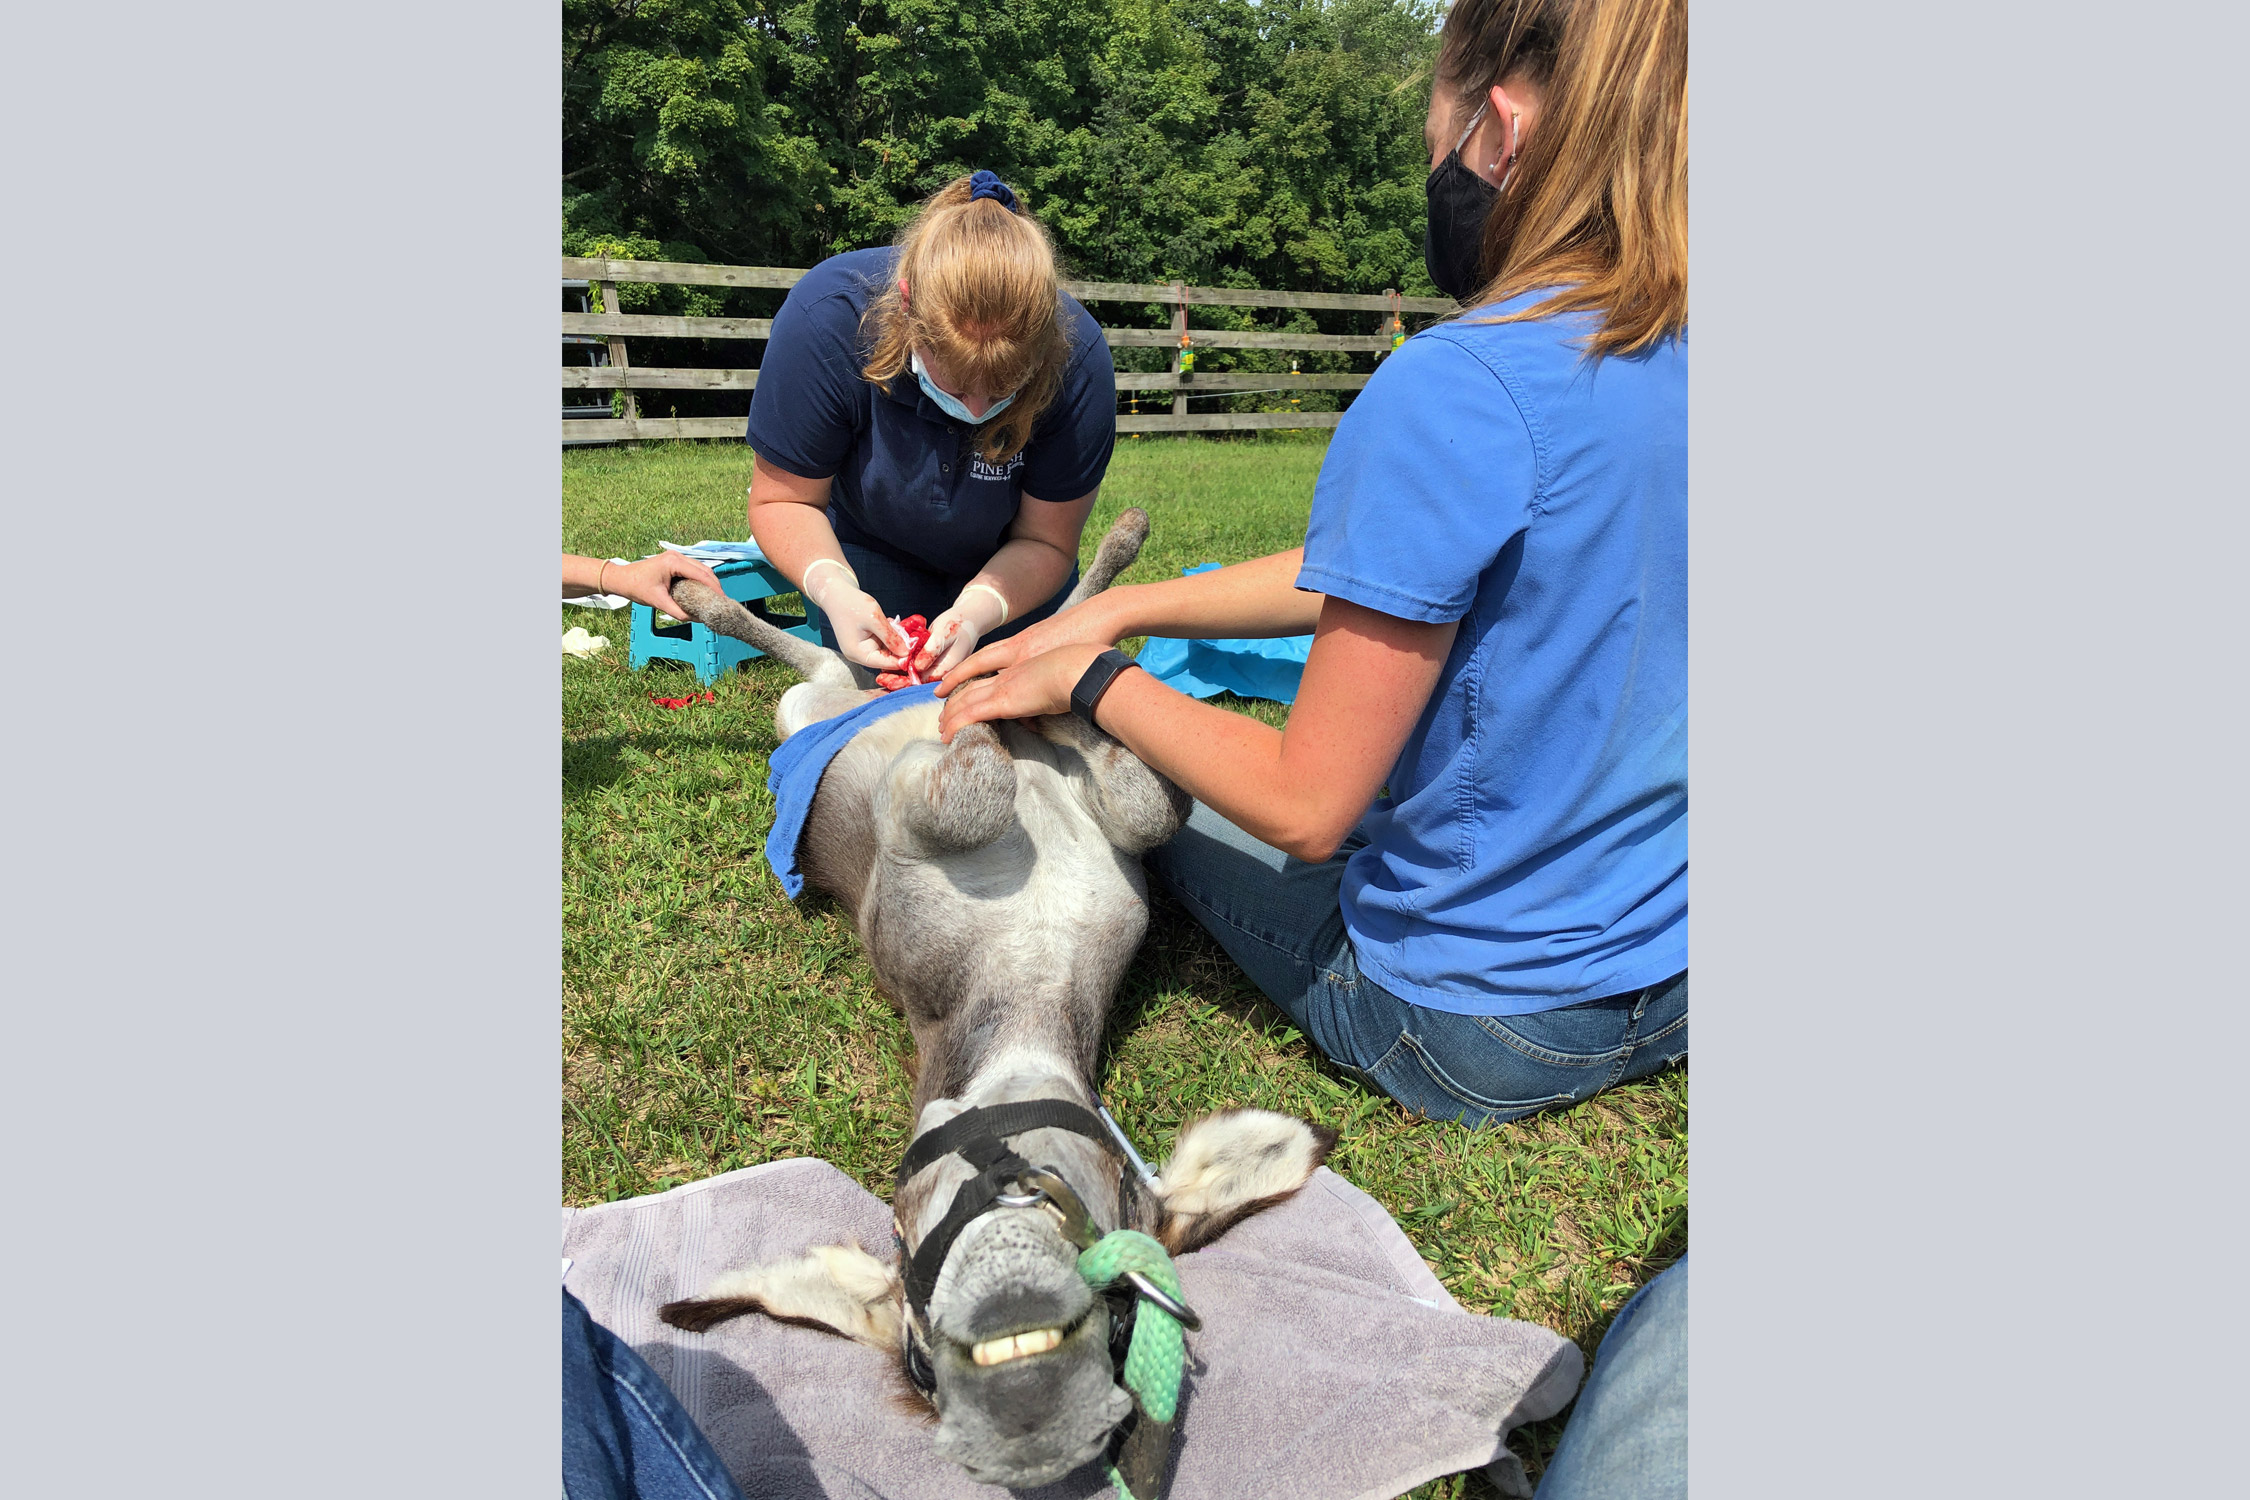 Pine Bush Equine Services and Veterinary Hospital